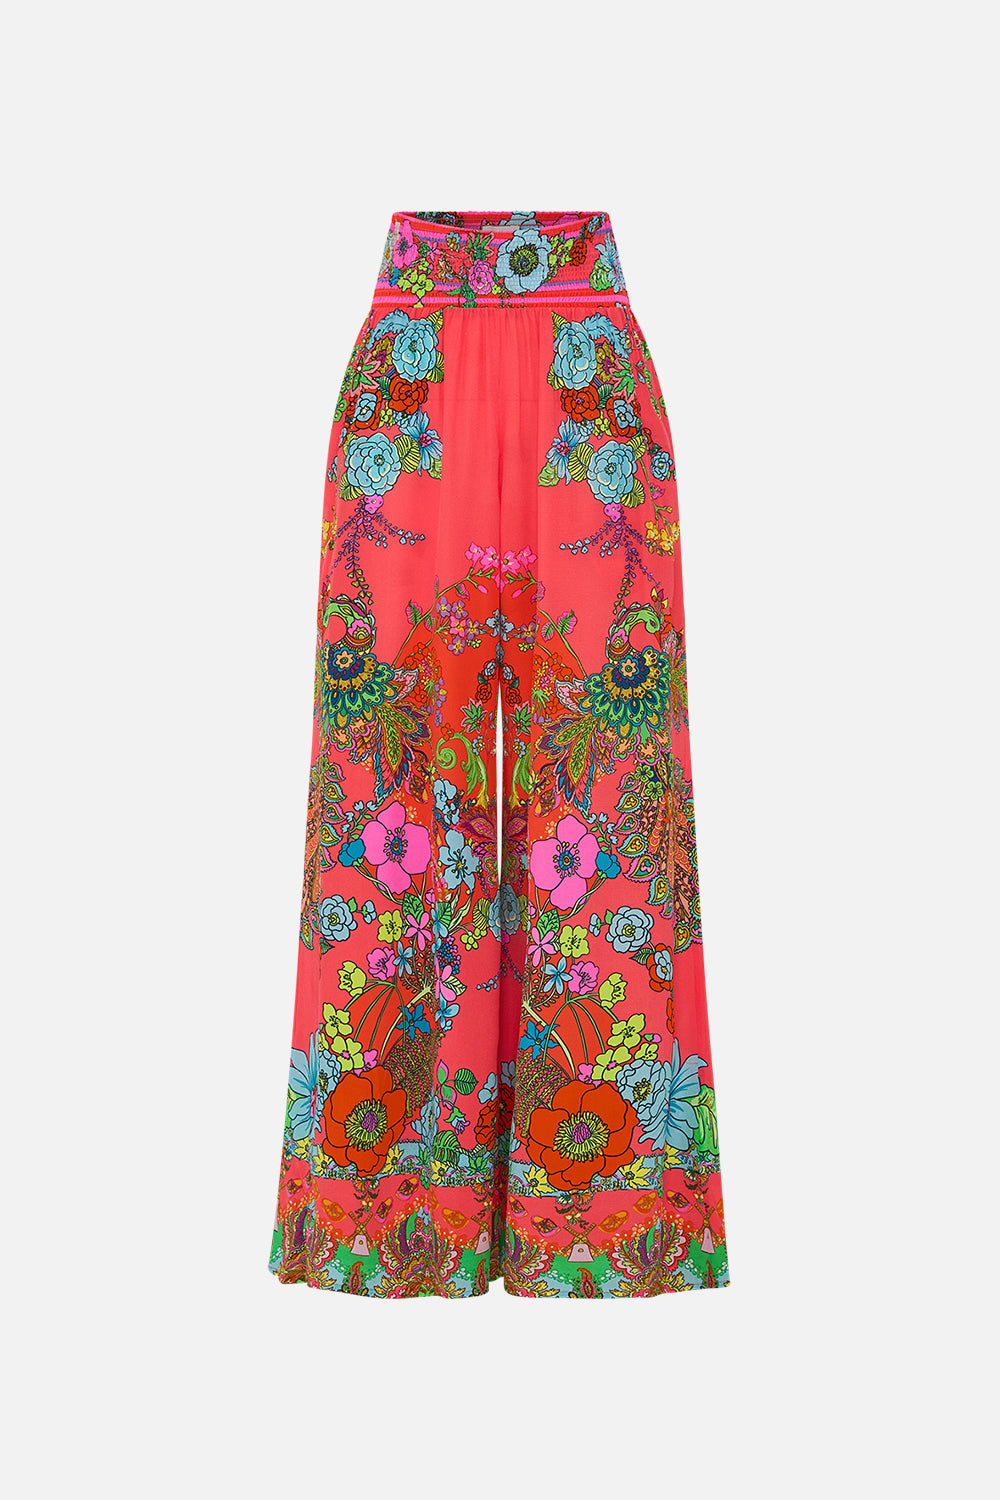 CAMILLA pink shirred waist pant in Windmills And Wildflowers print.